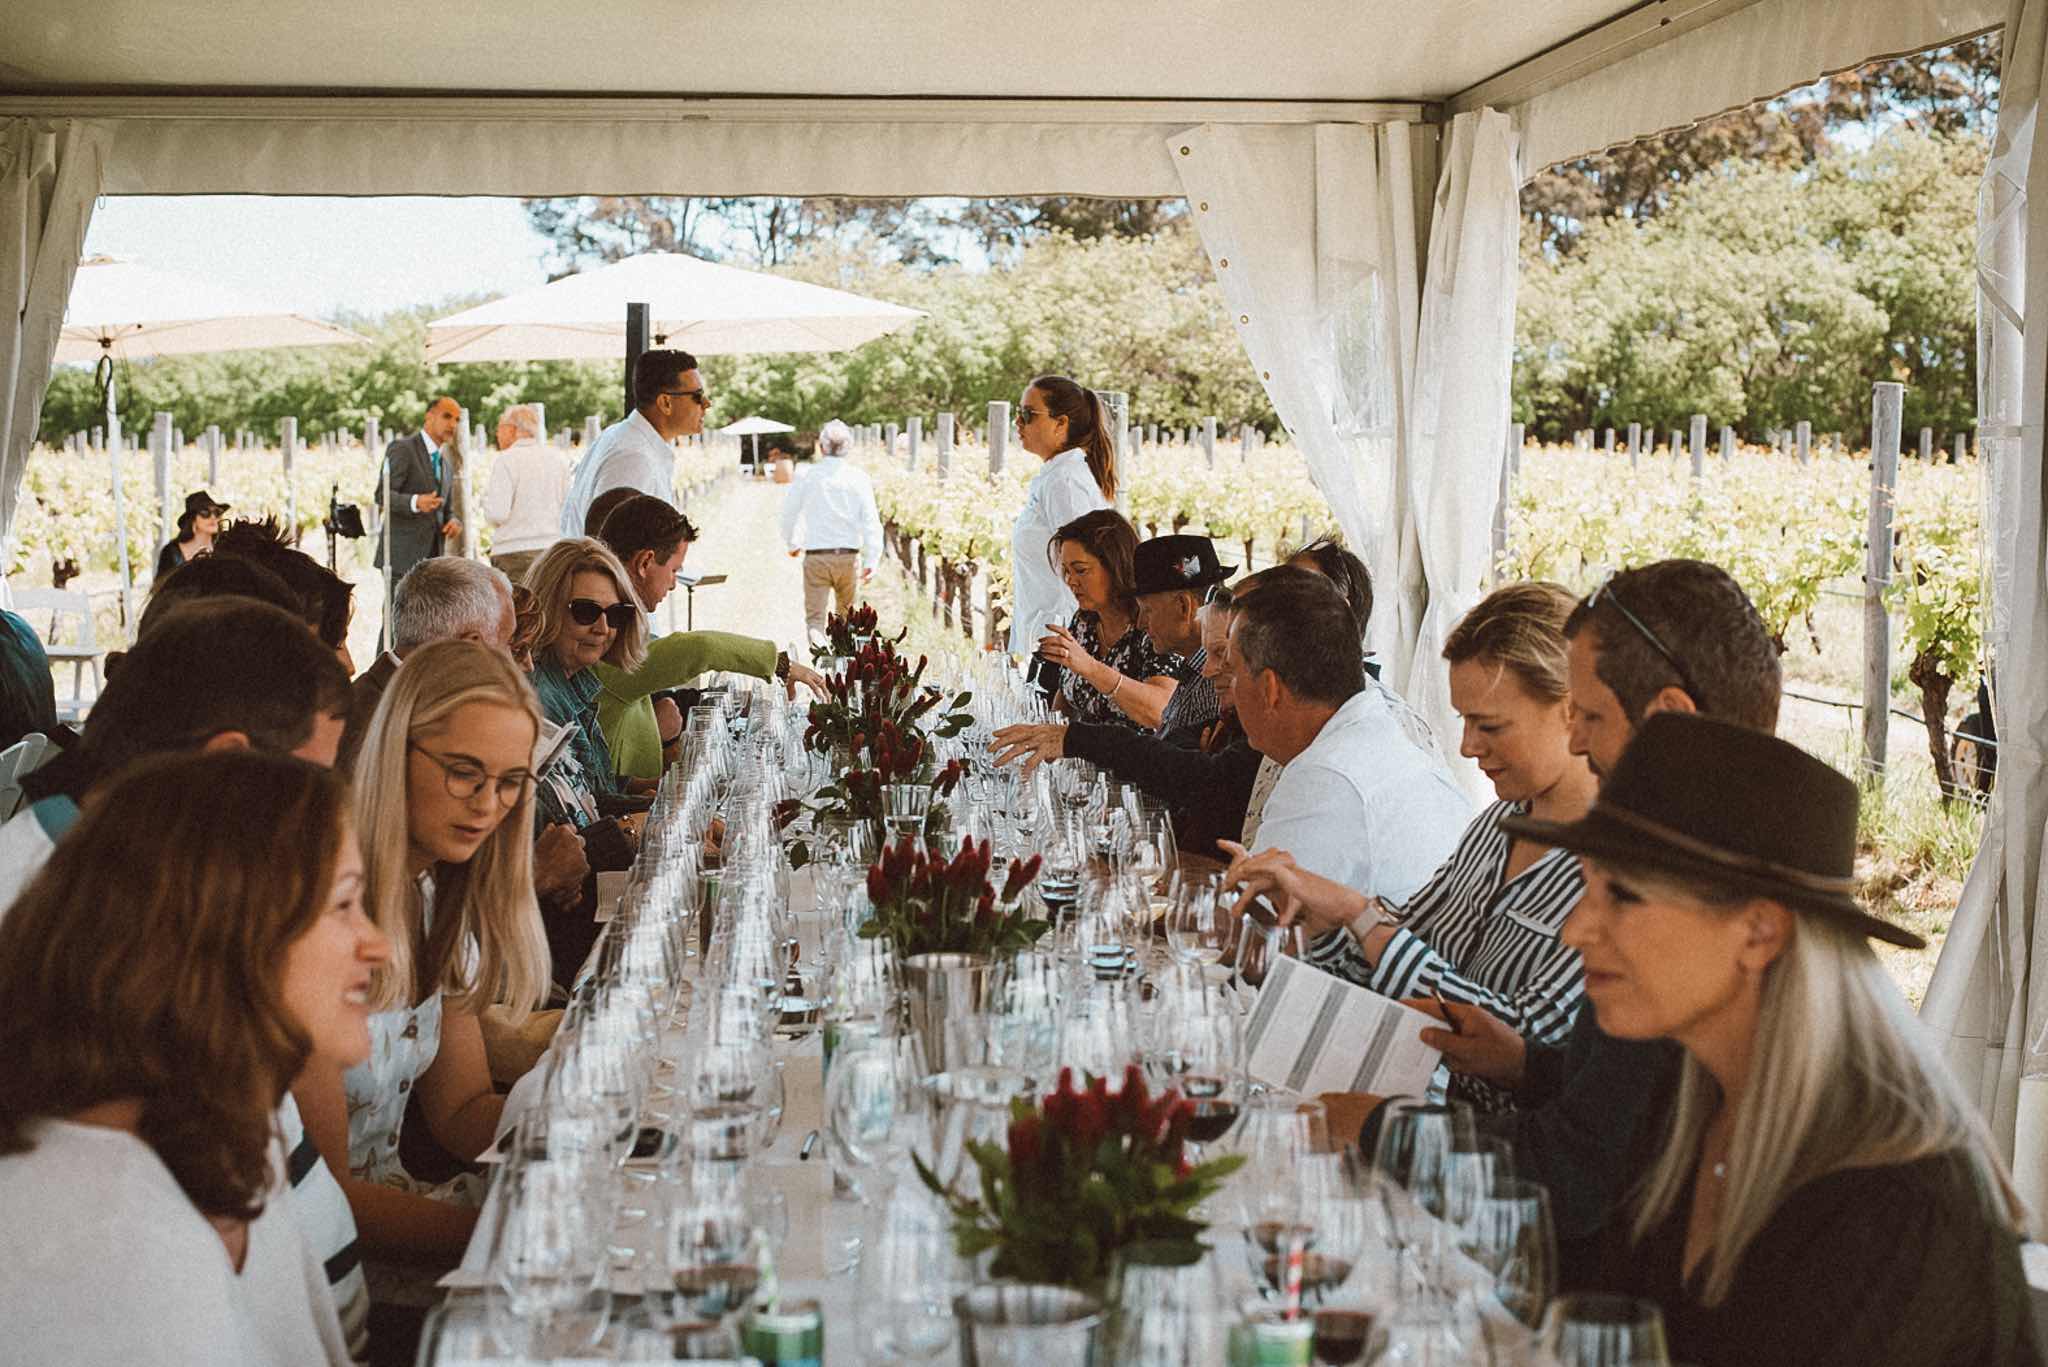 , Get insider access to Margaret River wine region with these festivals in Western Australia